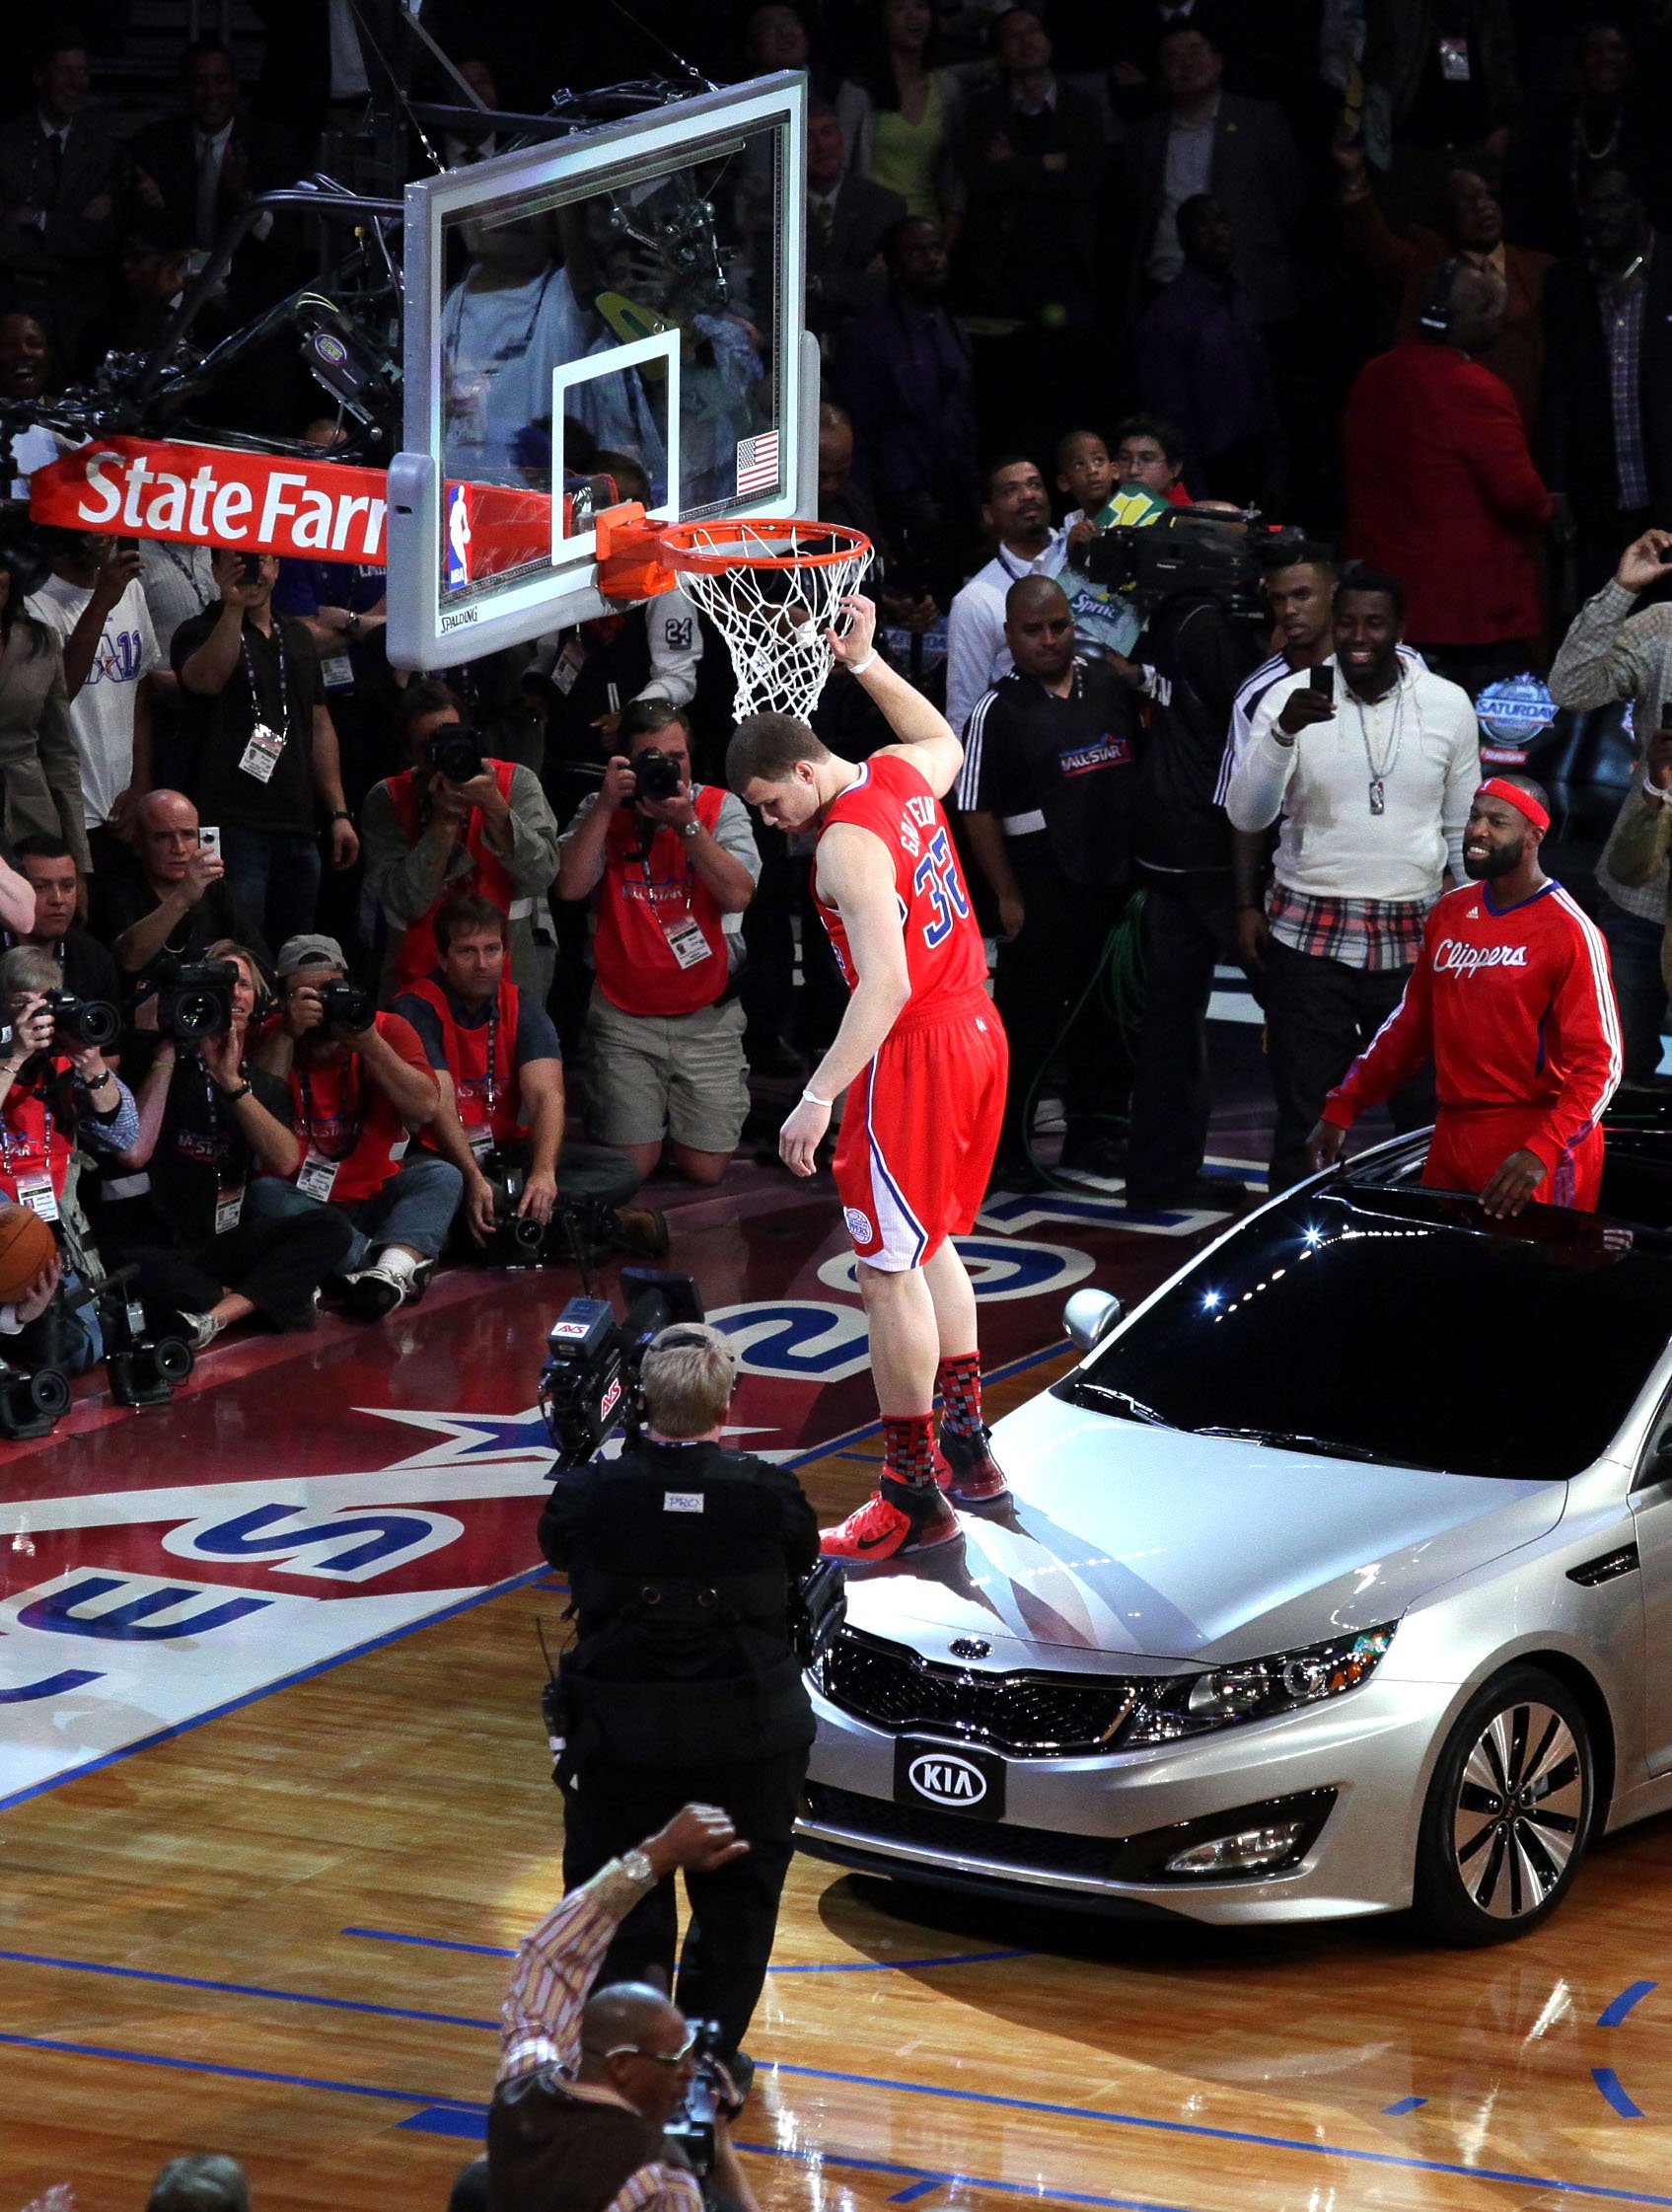 LOS ANGELES, CA - FEBRUARY 19: Blake Griffin from the L.A. Clippers slam dunks over a car with teammate Baron Davis inside during the Sprite Slam Dunk Contest apart of NBA All-Star Saturday Night at Staples Center on February 19, 2011 in Los Angeles, California. Noel Vasquez/Getty Images